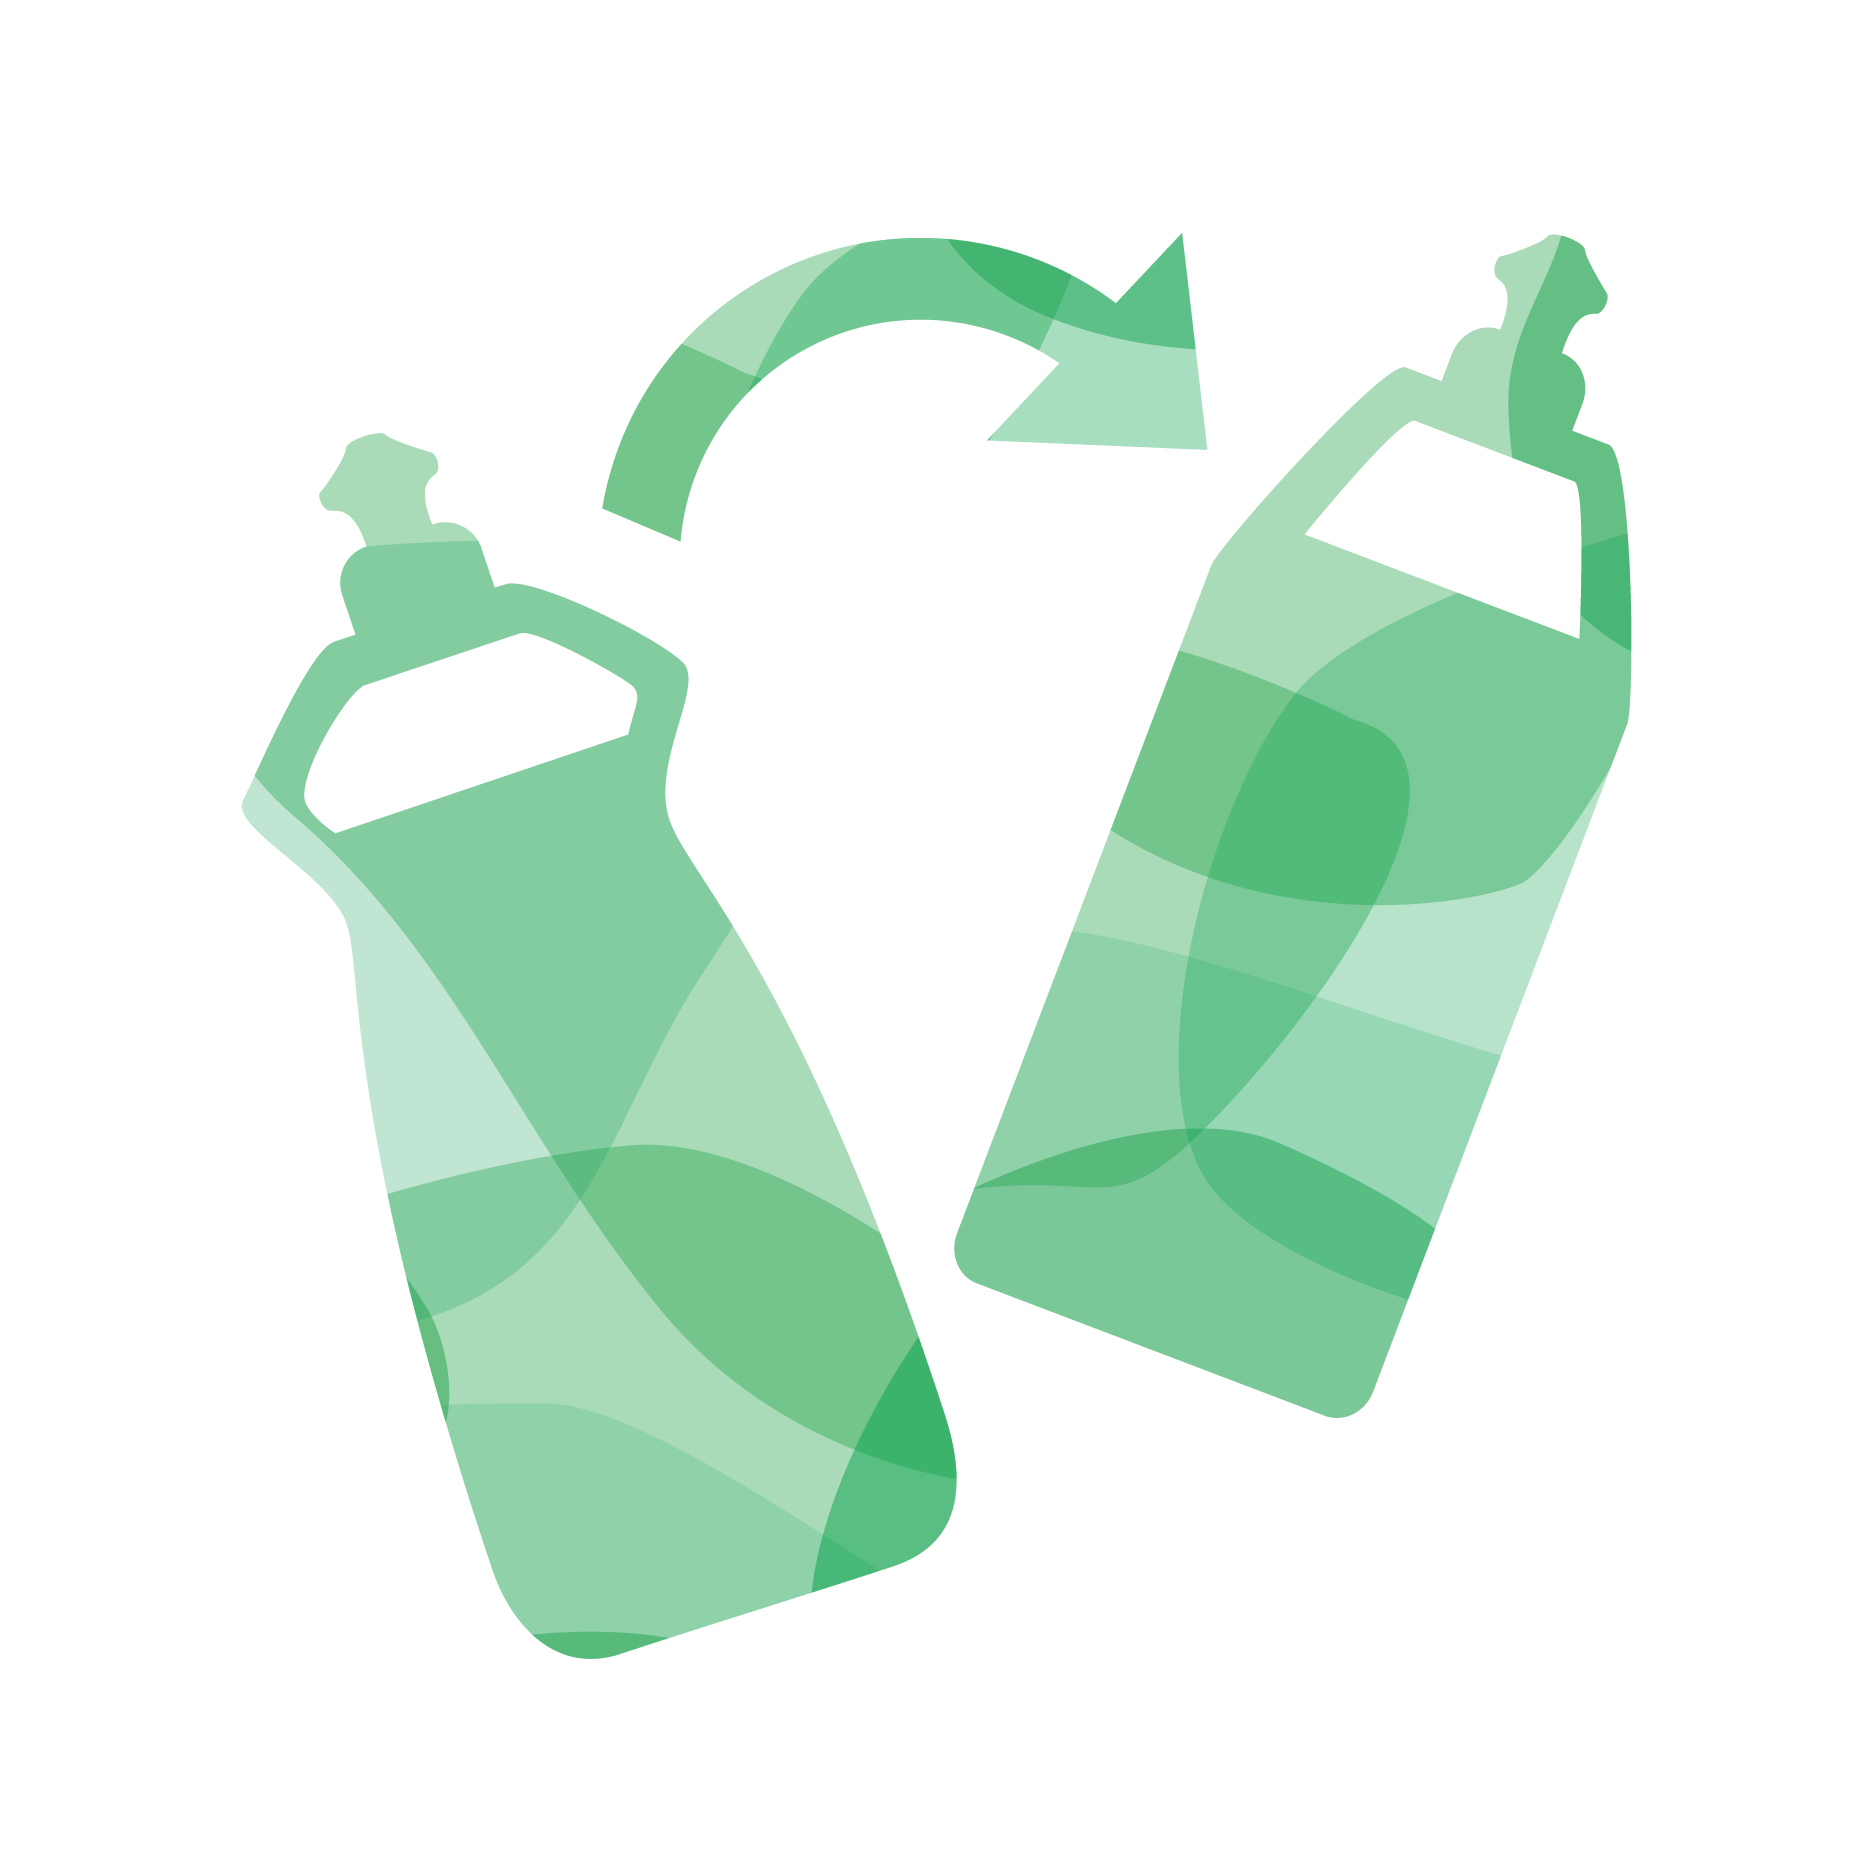 Illustration of one cleaning bottle being swapped for another